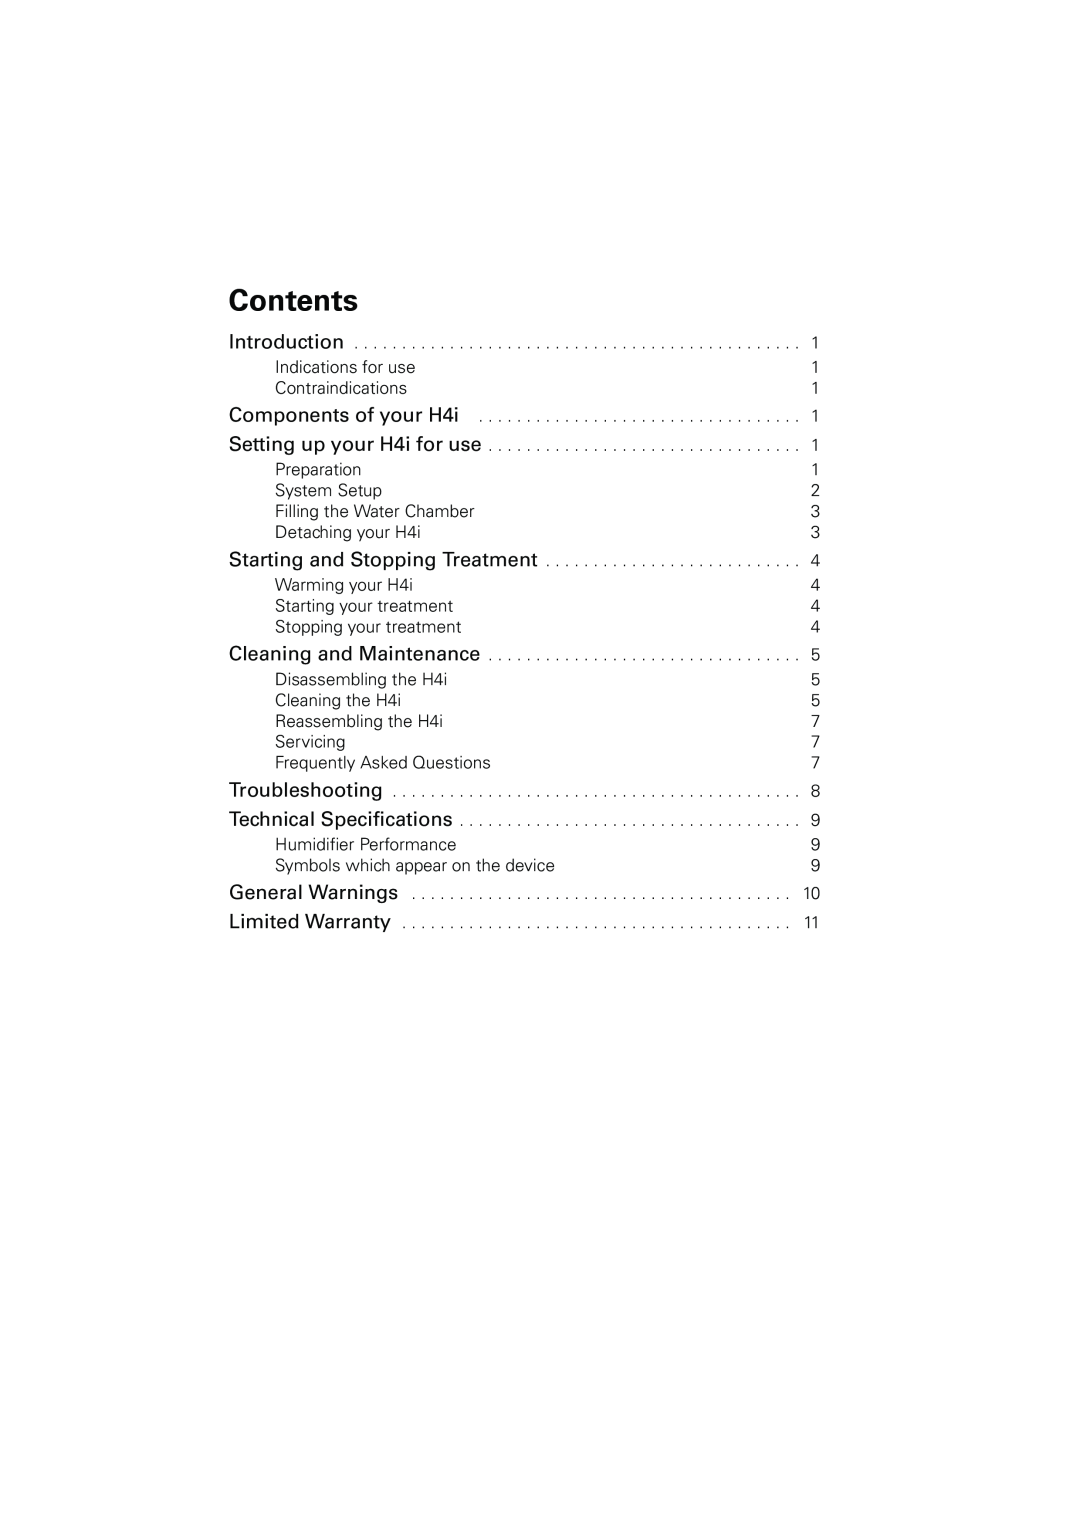 ResMed H4i manual Contents 